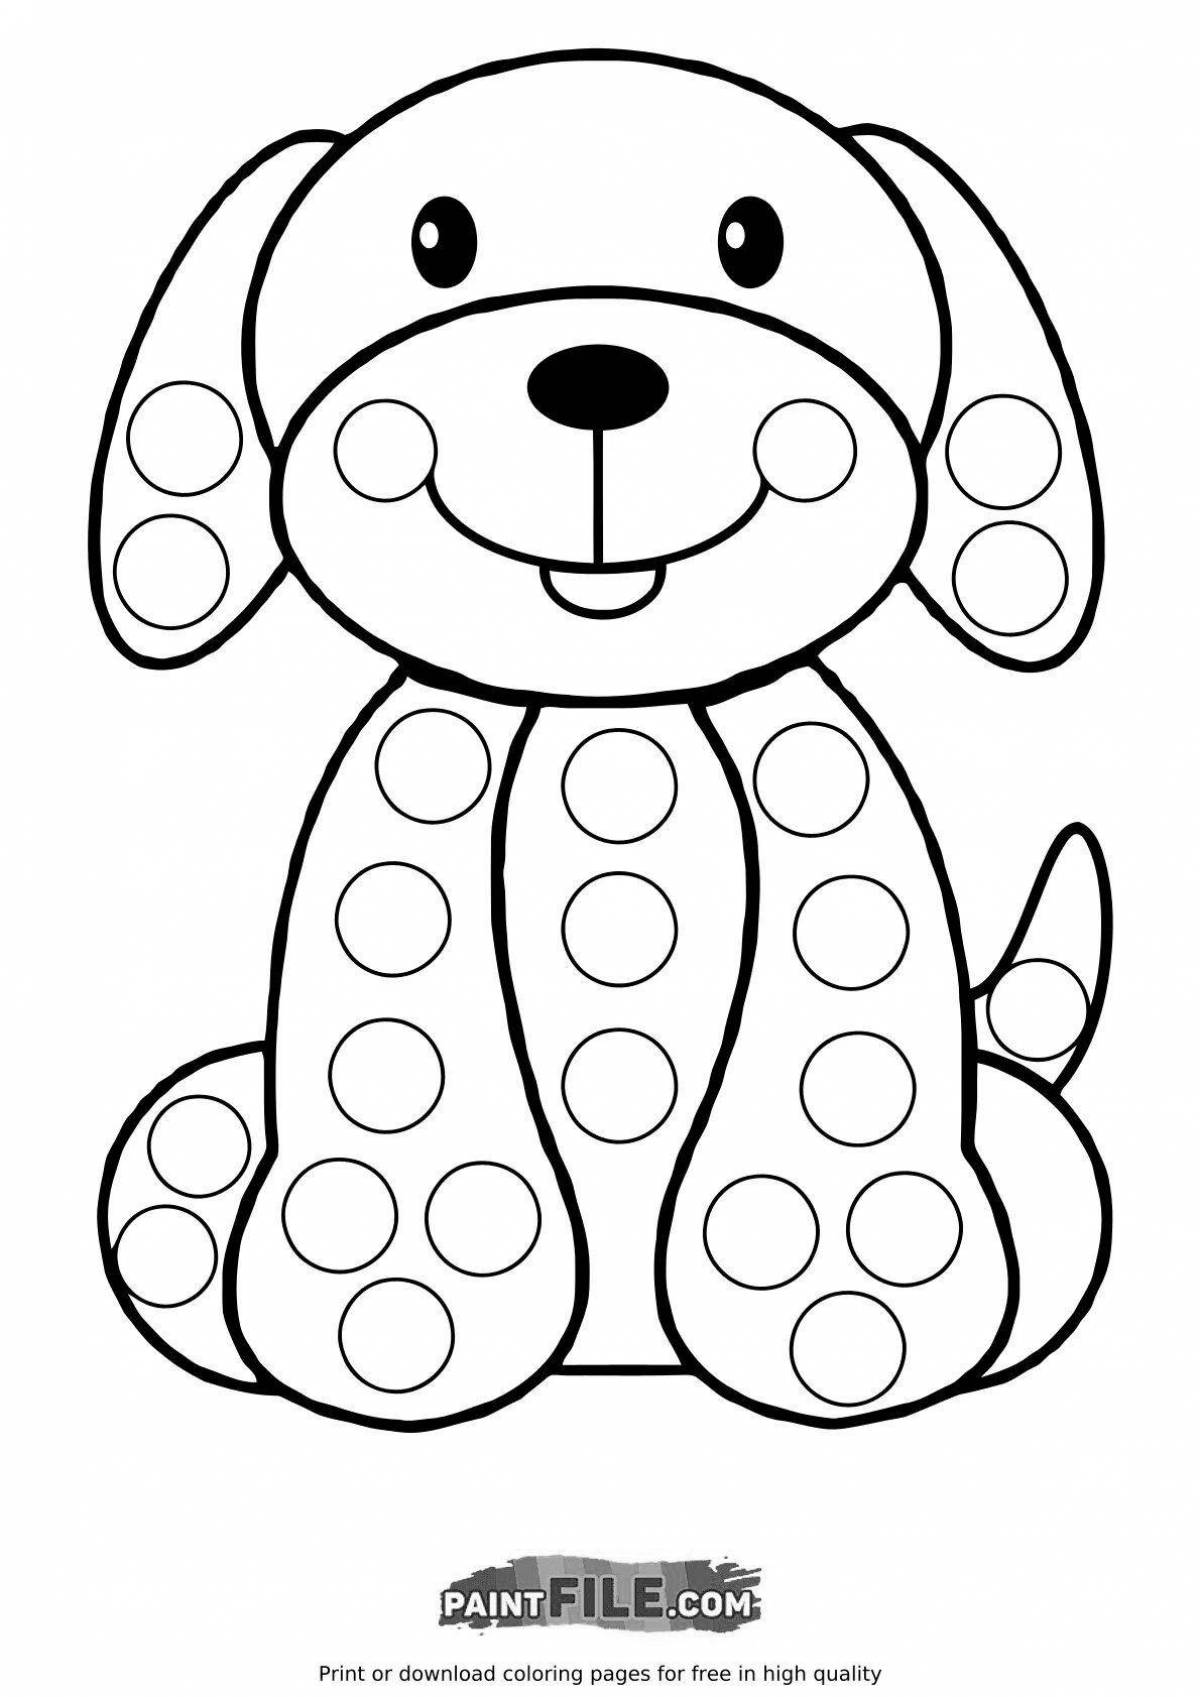 Coloring page with stylish DIY patterns